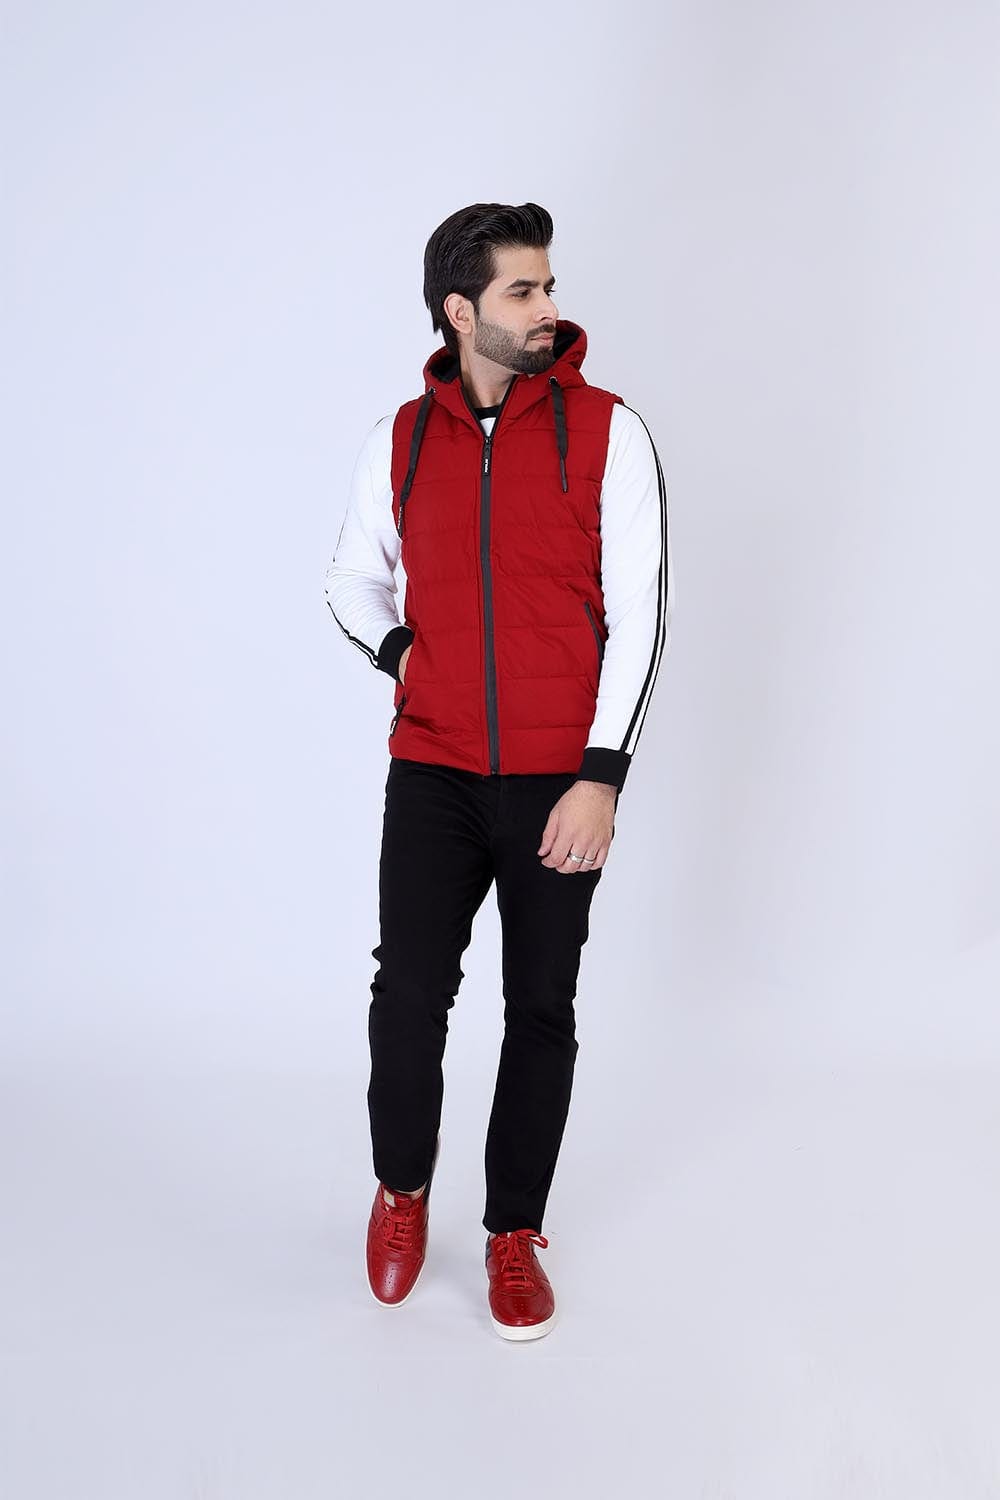 Hope Not Out by Shahid Afridi Men Jacket Hood puffer Jacket